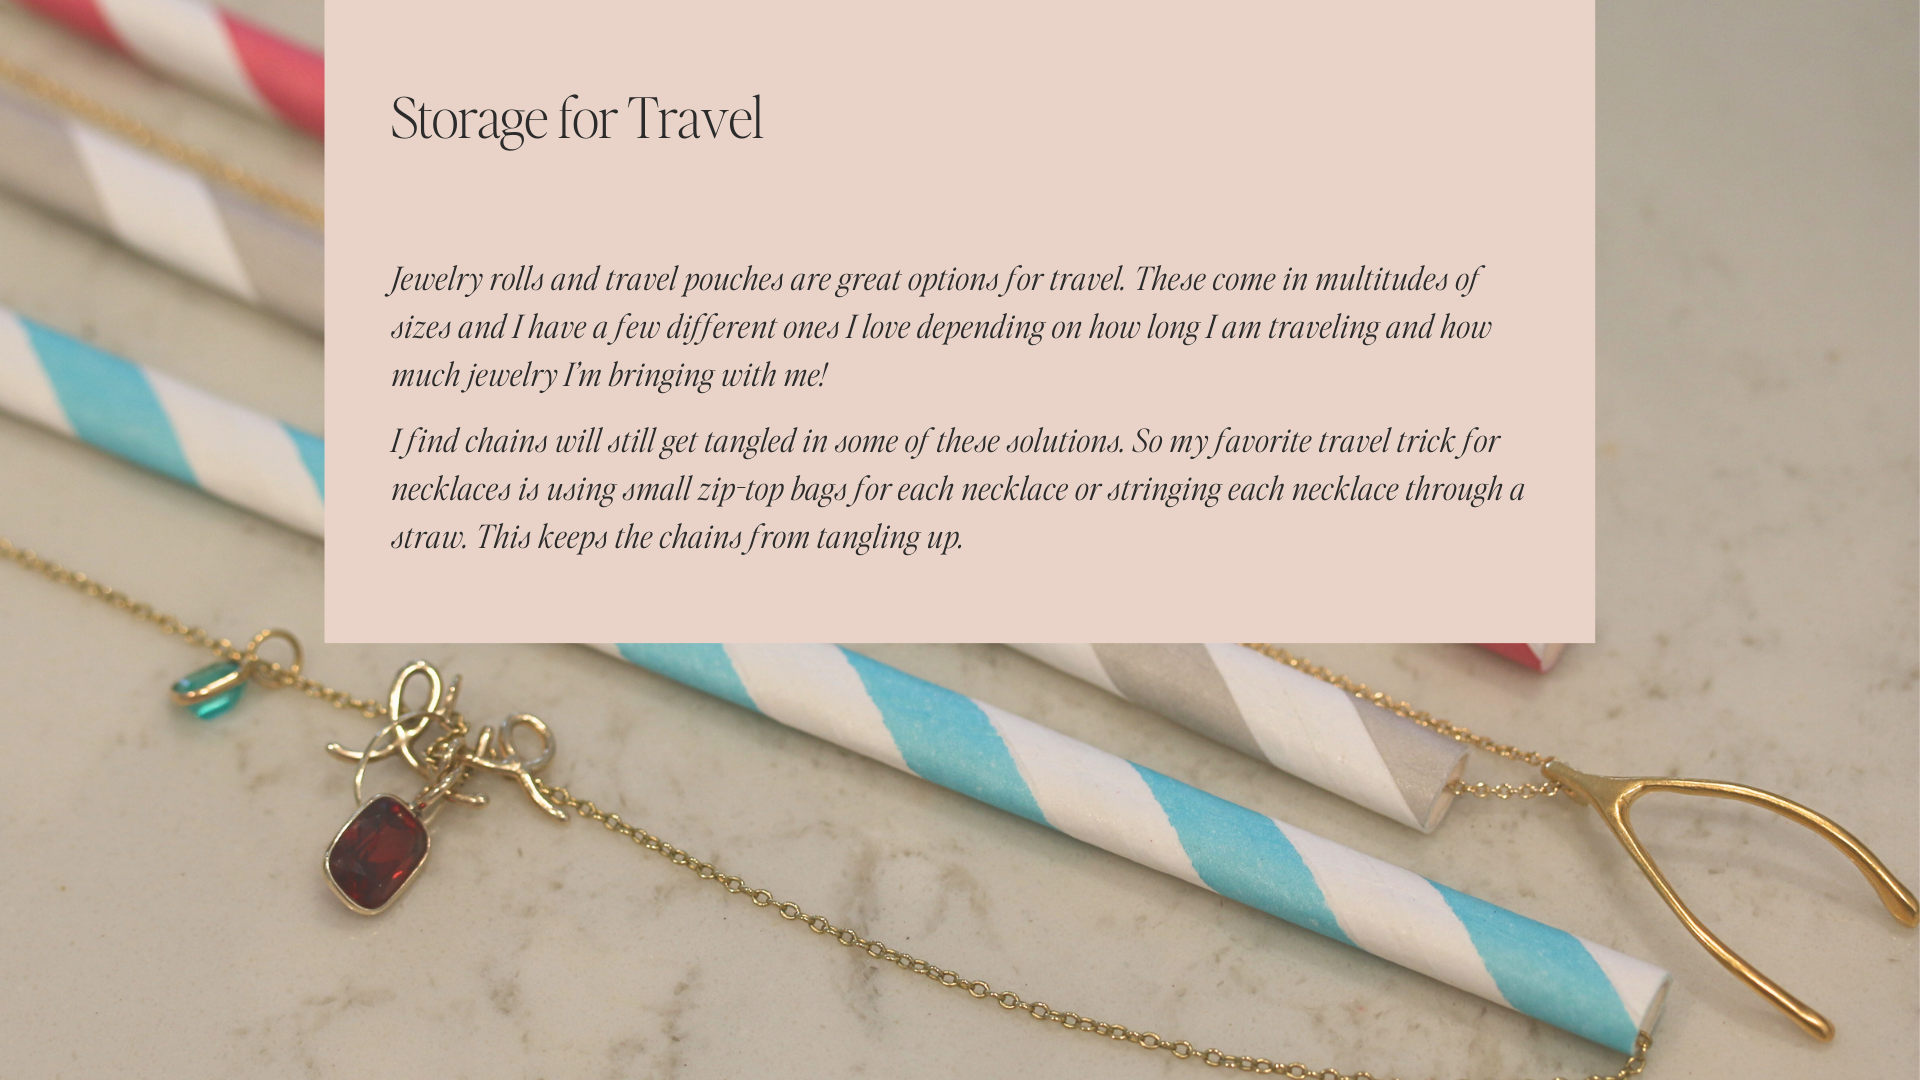 Storage for Travel | Jewelry rolls and travel pouches are great options for travel. These come in multitudes of sizes and I have a few different ones I love depending on how long I am traveling and how much jewelry I’m bringing with me!  I find chains will still get tangled in some of these solutions. So my favorite travel trick for necklaces is using small zip-top bags for each necklace or stringing each necklace through a straw. This keeps the chains from tangling up.